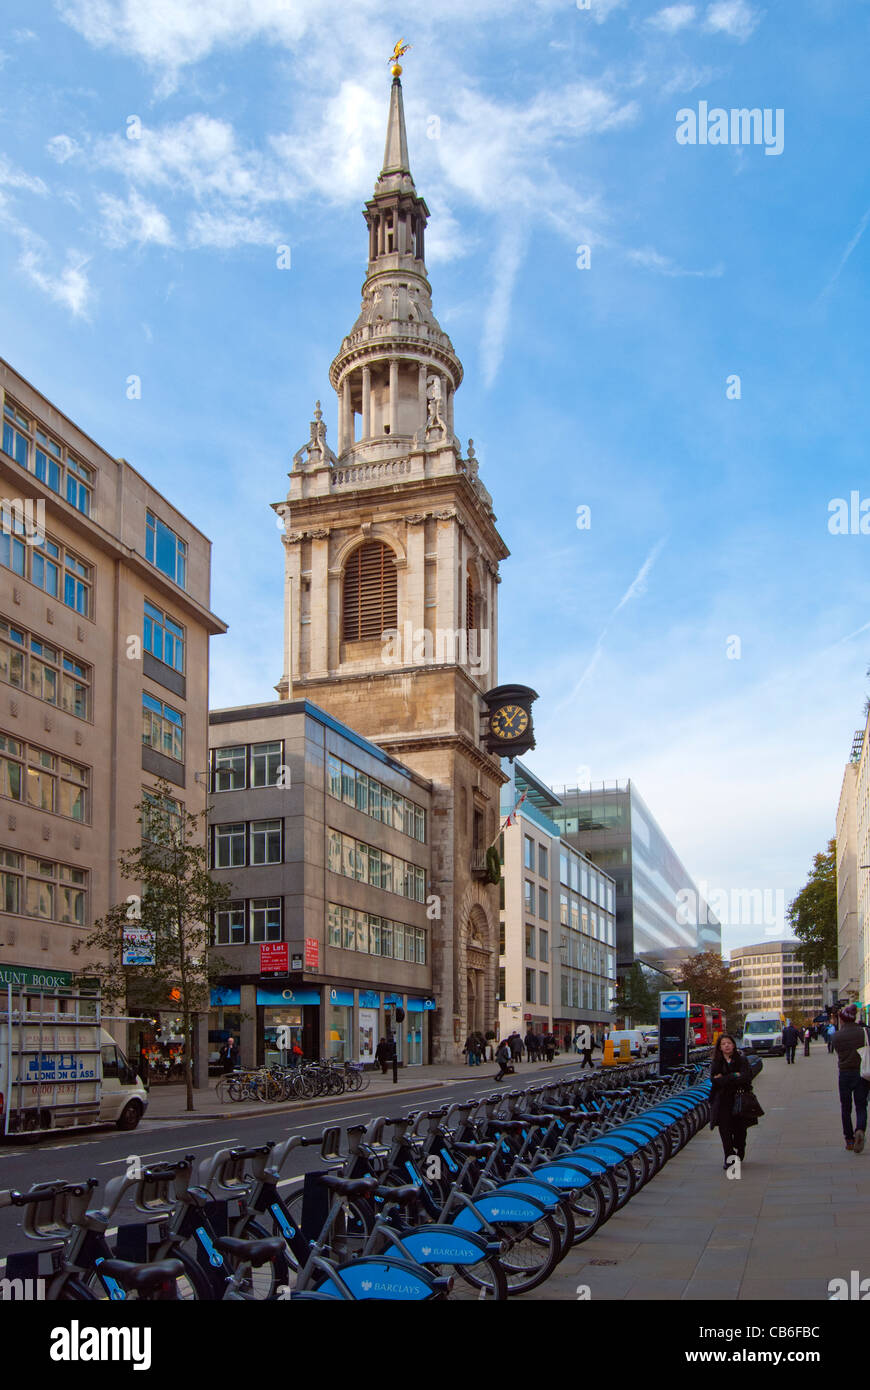 St Mary le Bow, Cheapside,City of London Stock Photo